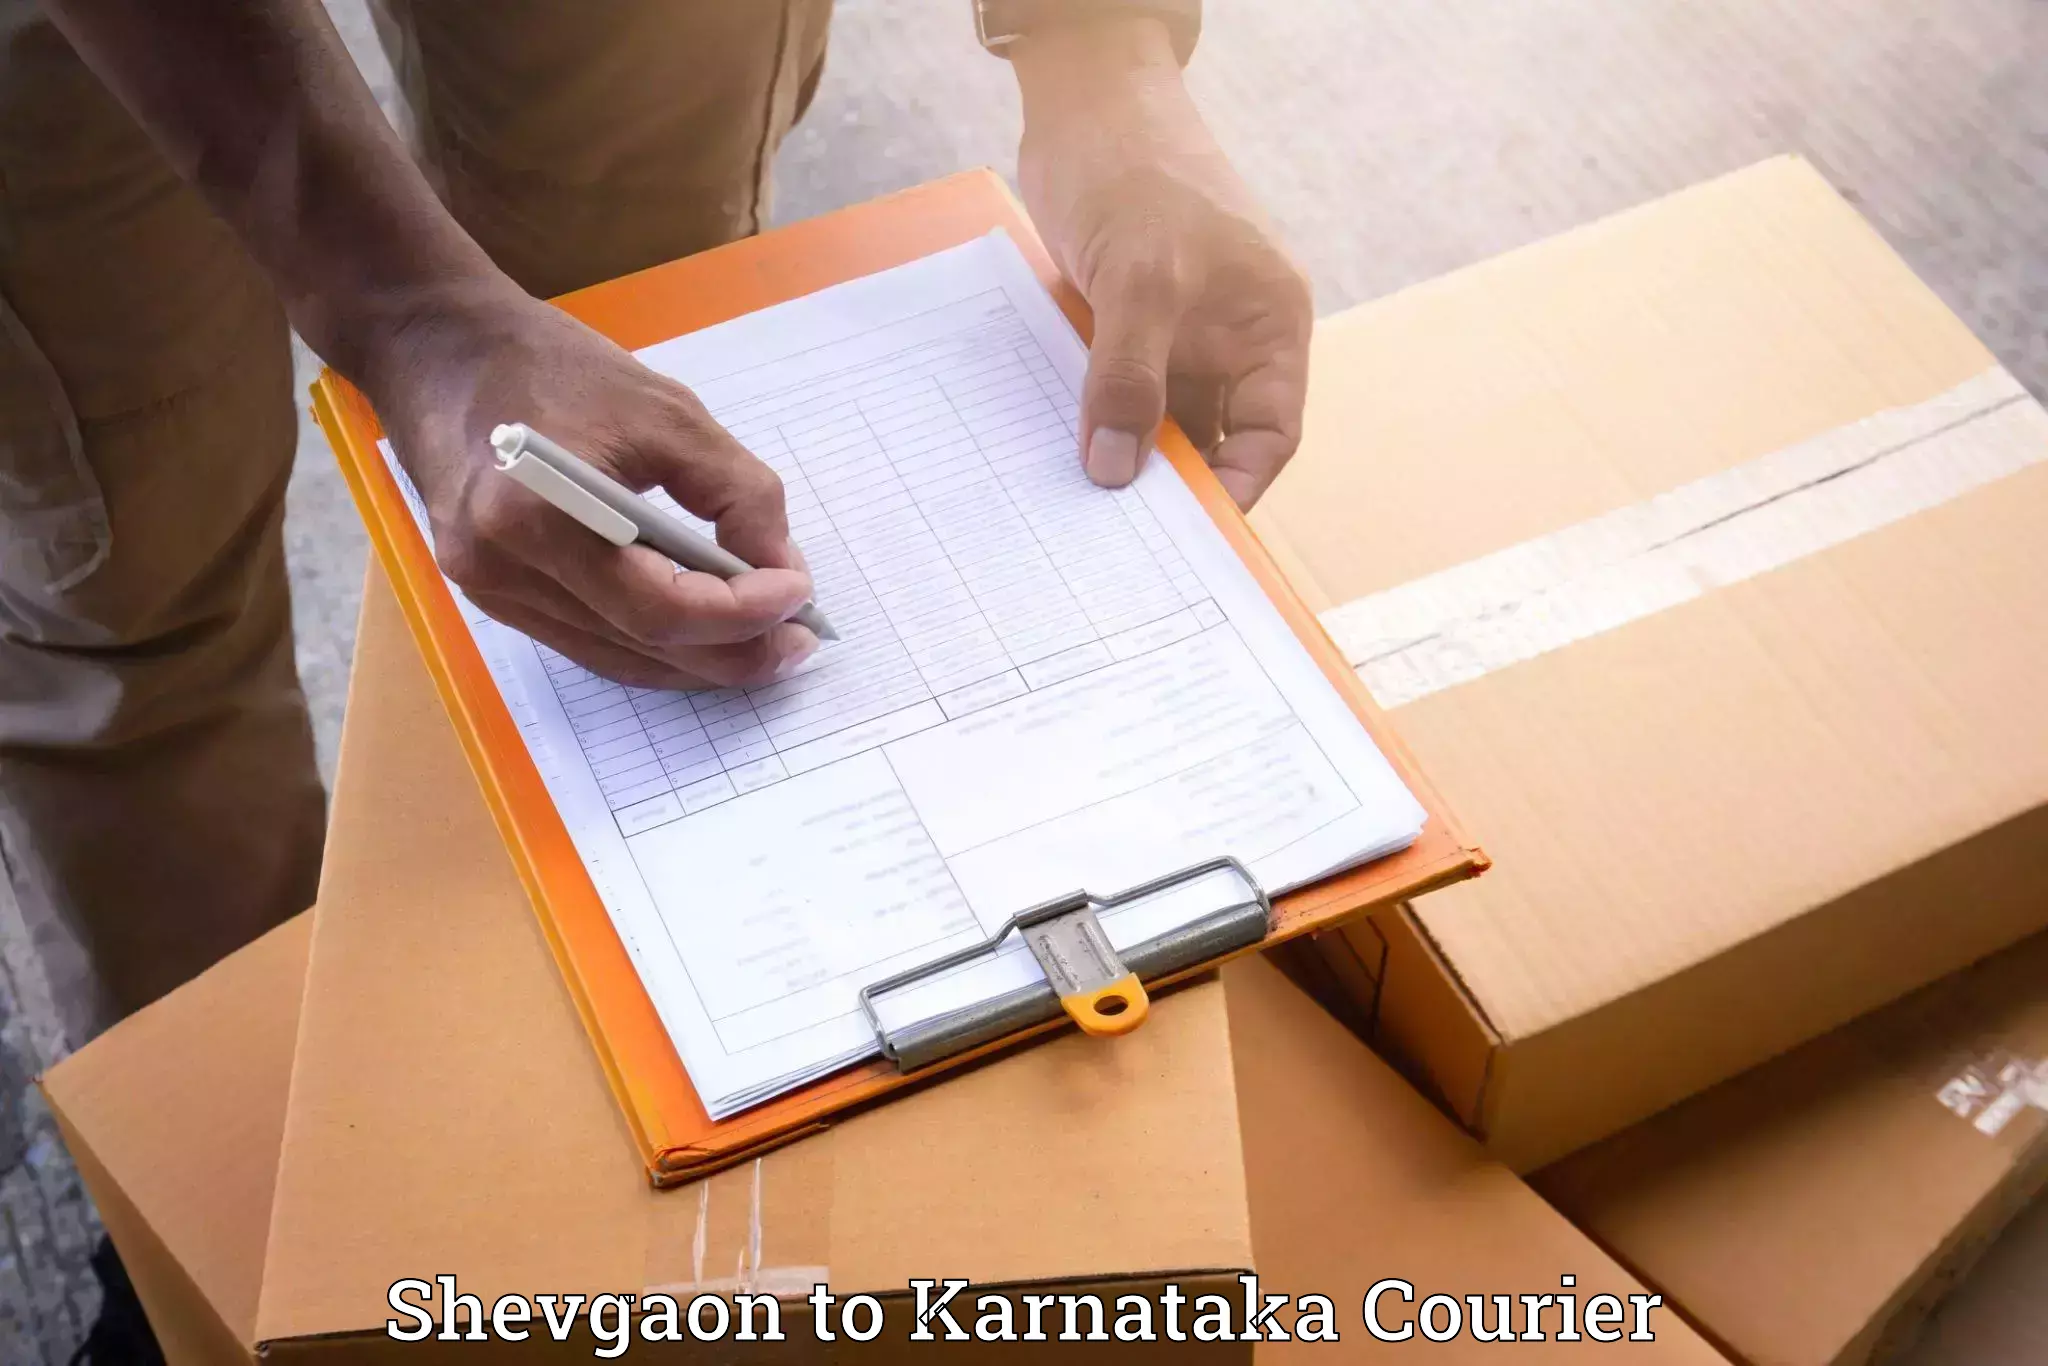 Quality relocation assistance in Shevgaon to Hiriyur